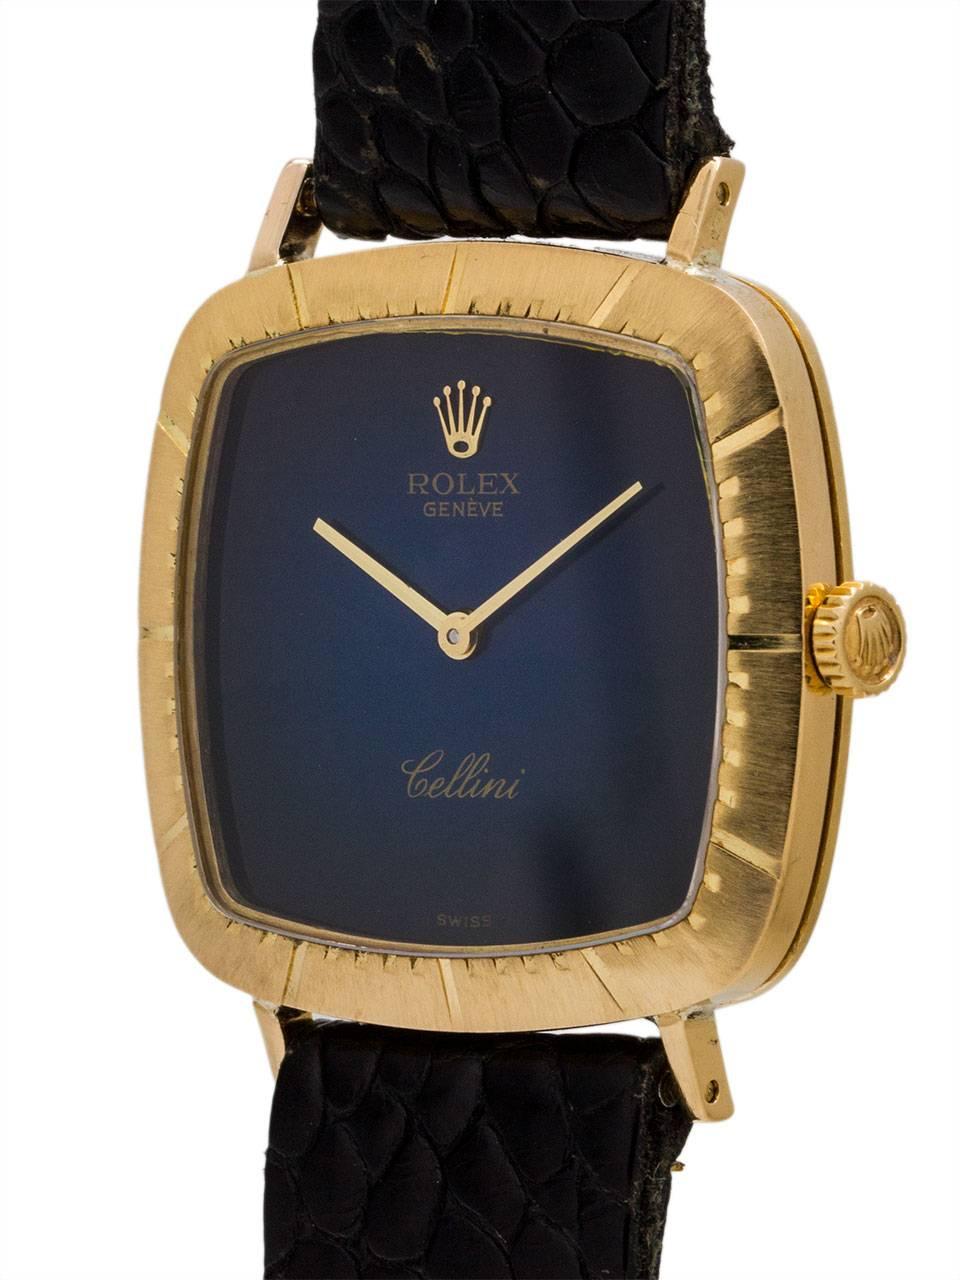 
Vintage Rolex Cellini 18K yellow gold circa 1970’s. Featuring a very interesting cushion shaped case, with engraved minute and hour markers on the bezel. This vintage model is further distinguished by the original vignette dial, fading from a deep